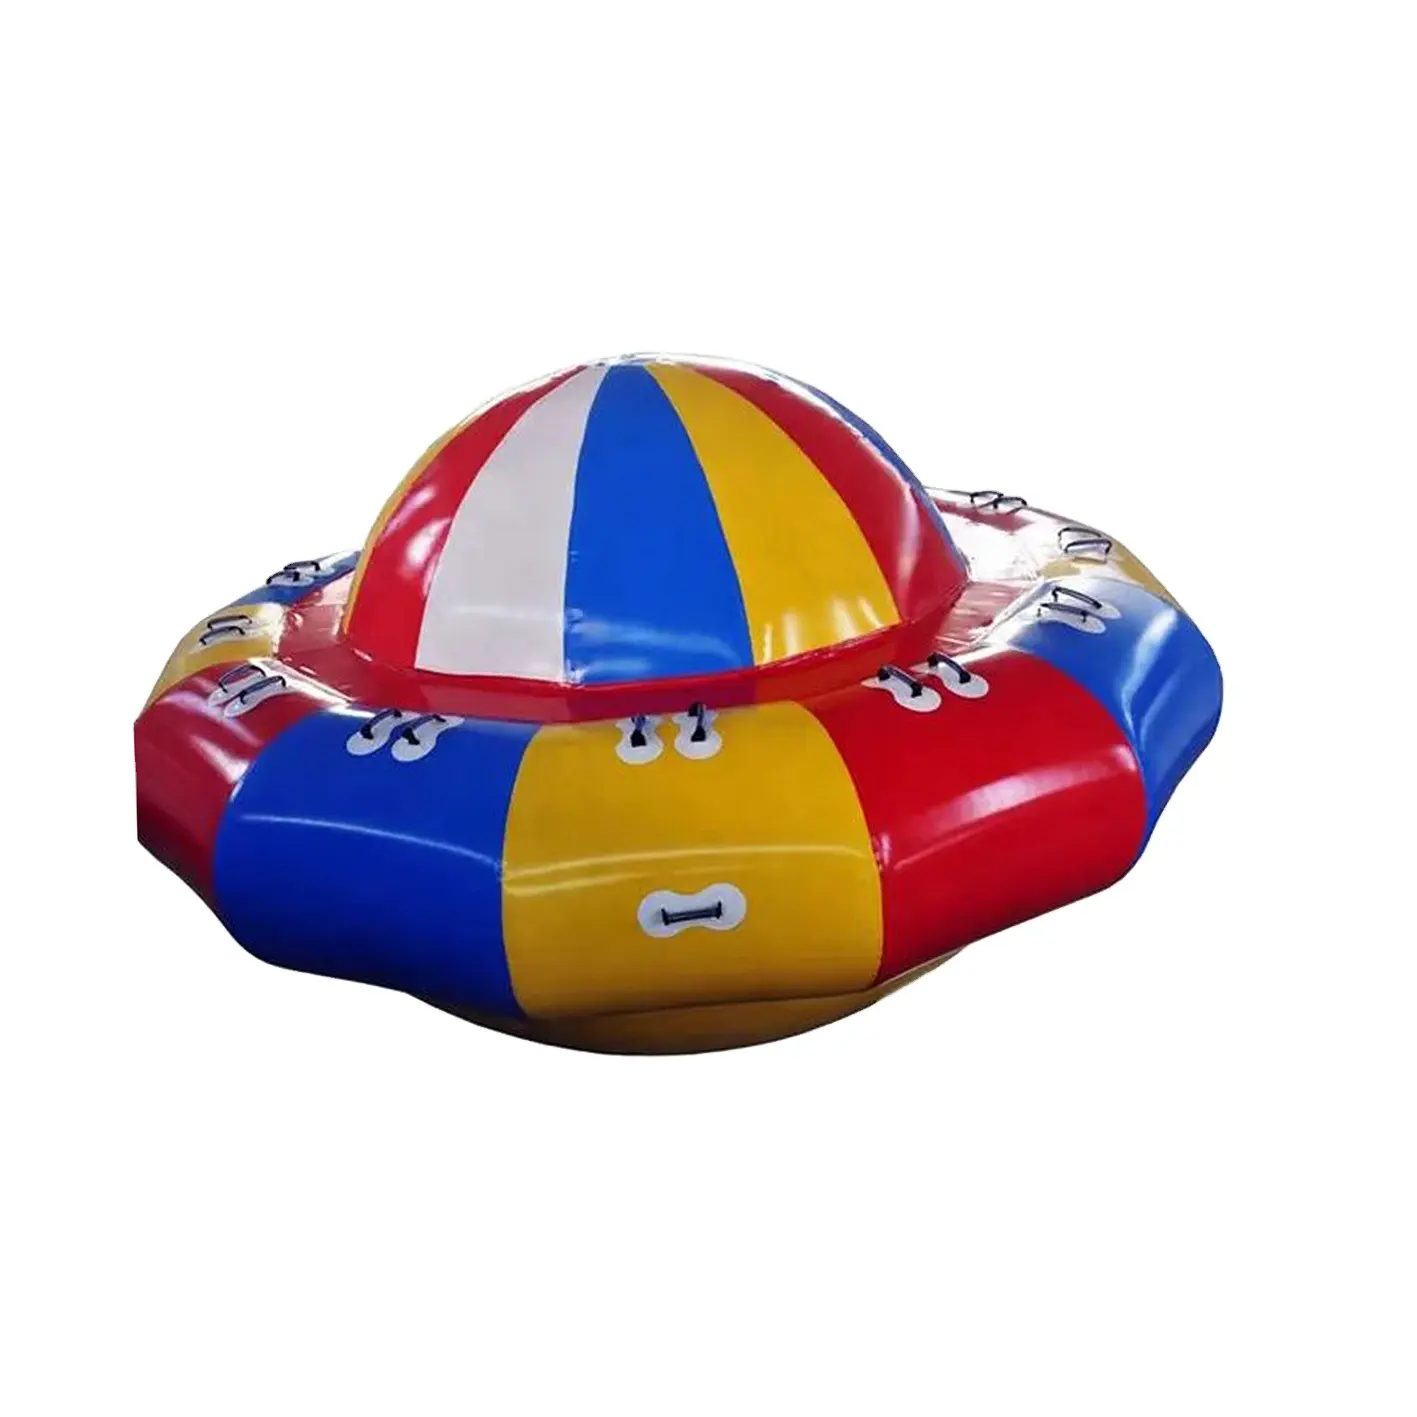 Water Toy Inflatable Disco Boat Towable Tube/water taxi boat Inflatable Flying Disco Boat For Water Sports